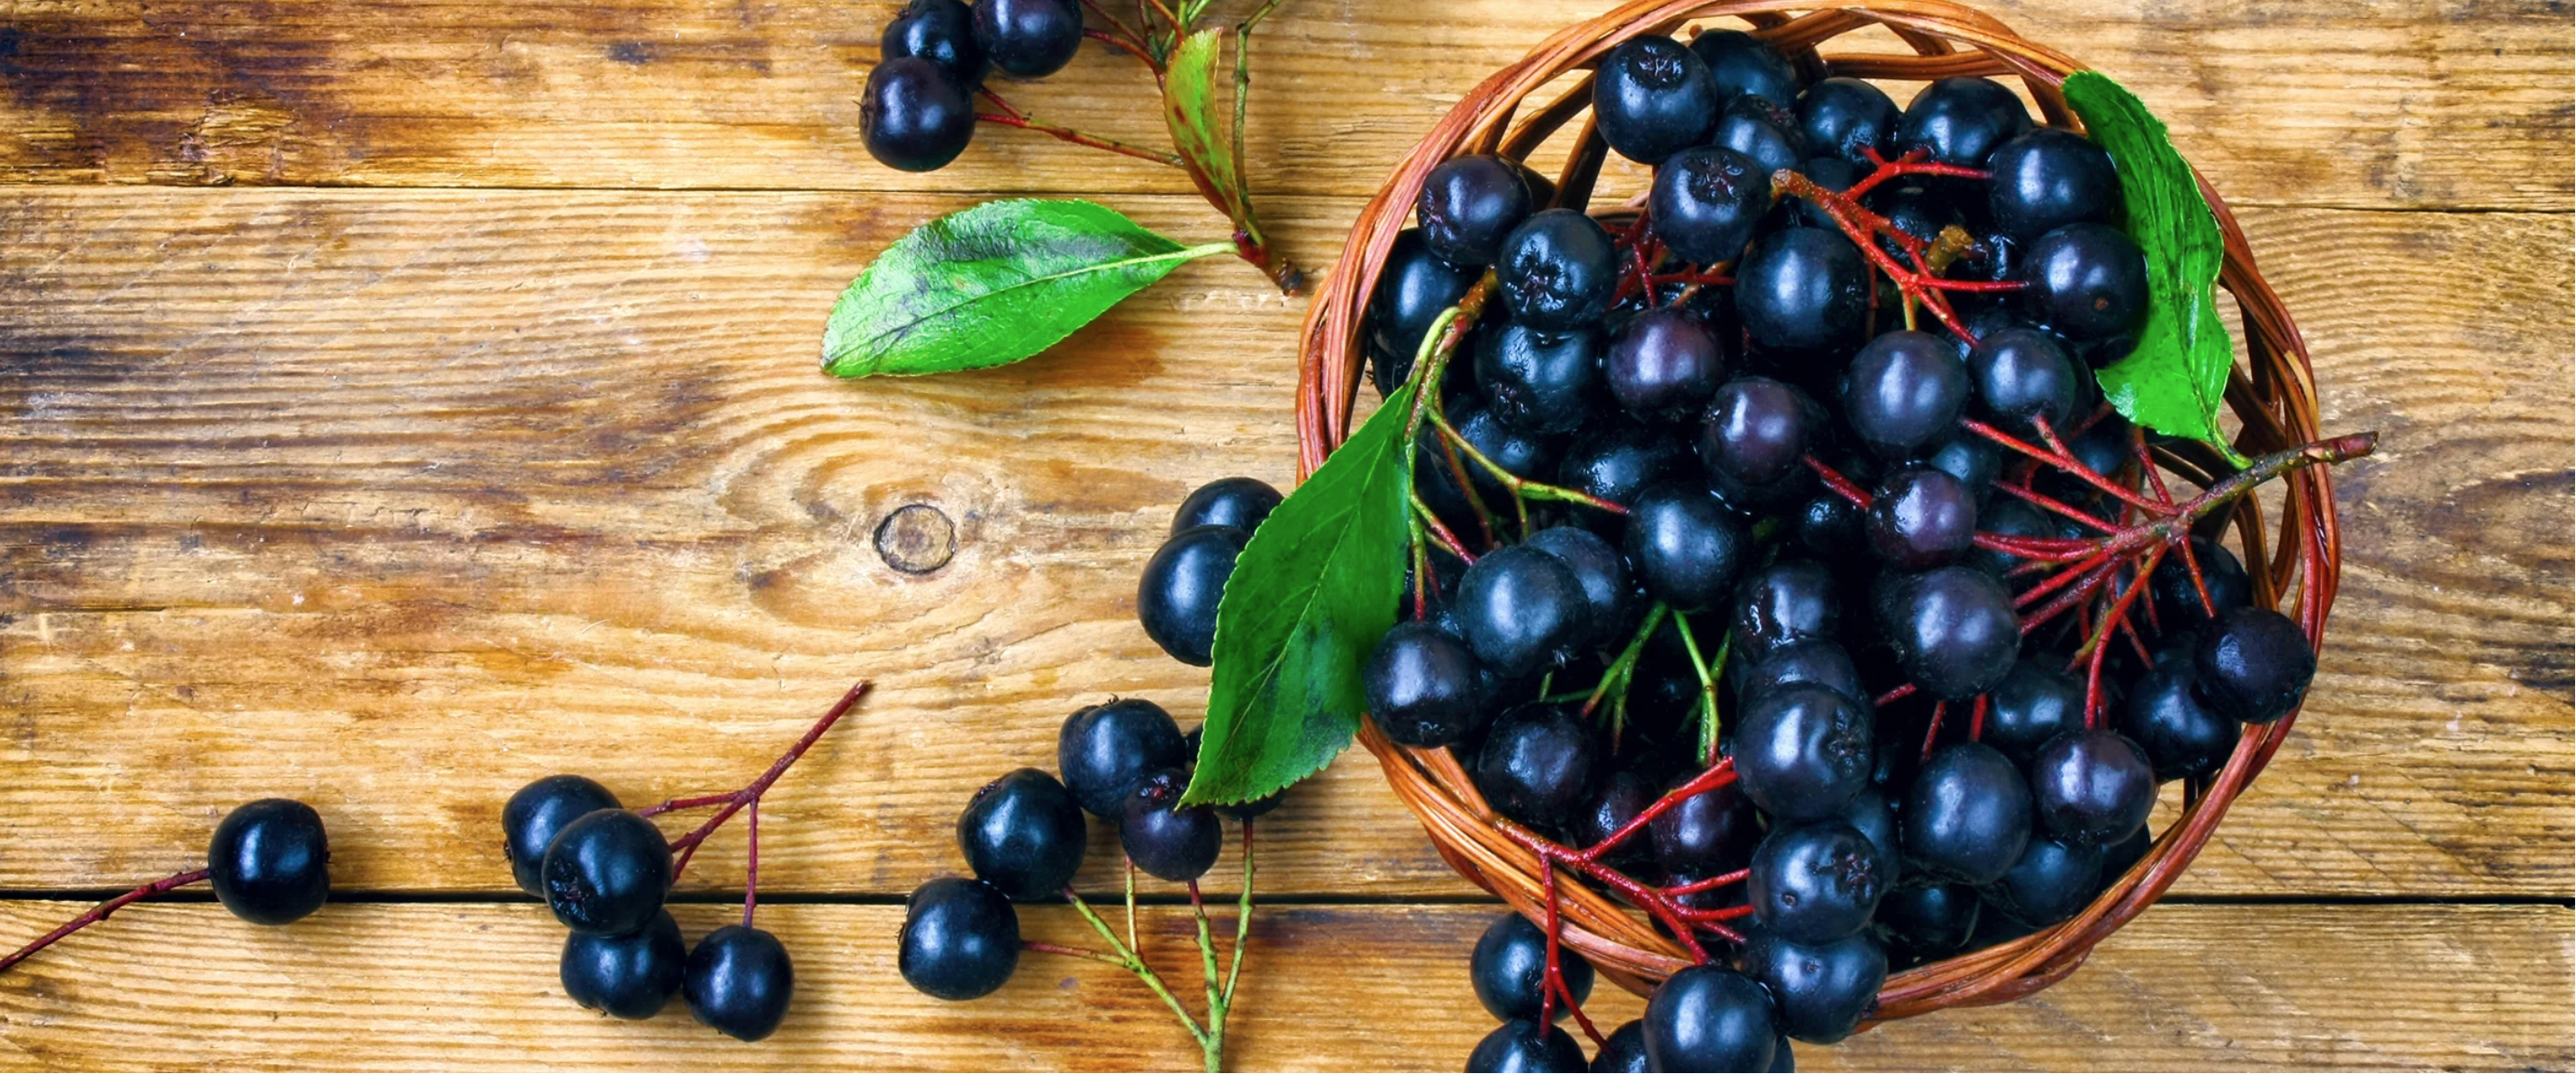 Superfood Aronia: What is aronia berry good for?